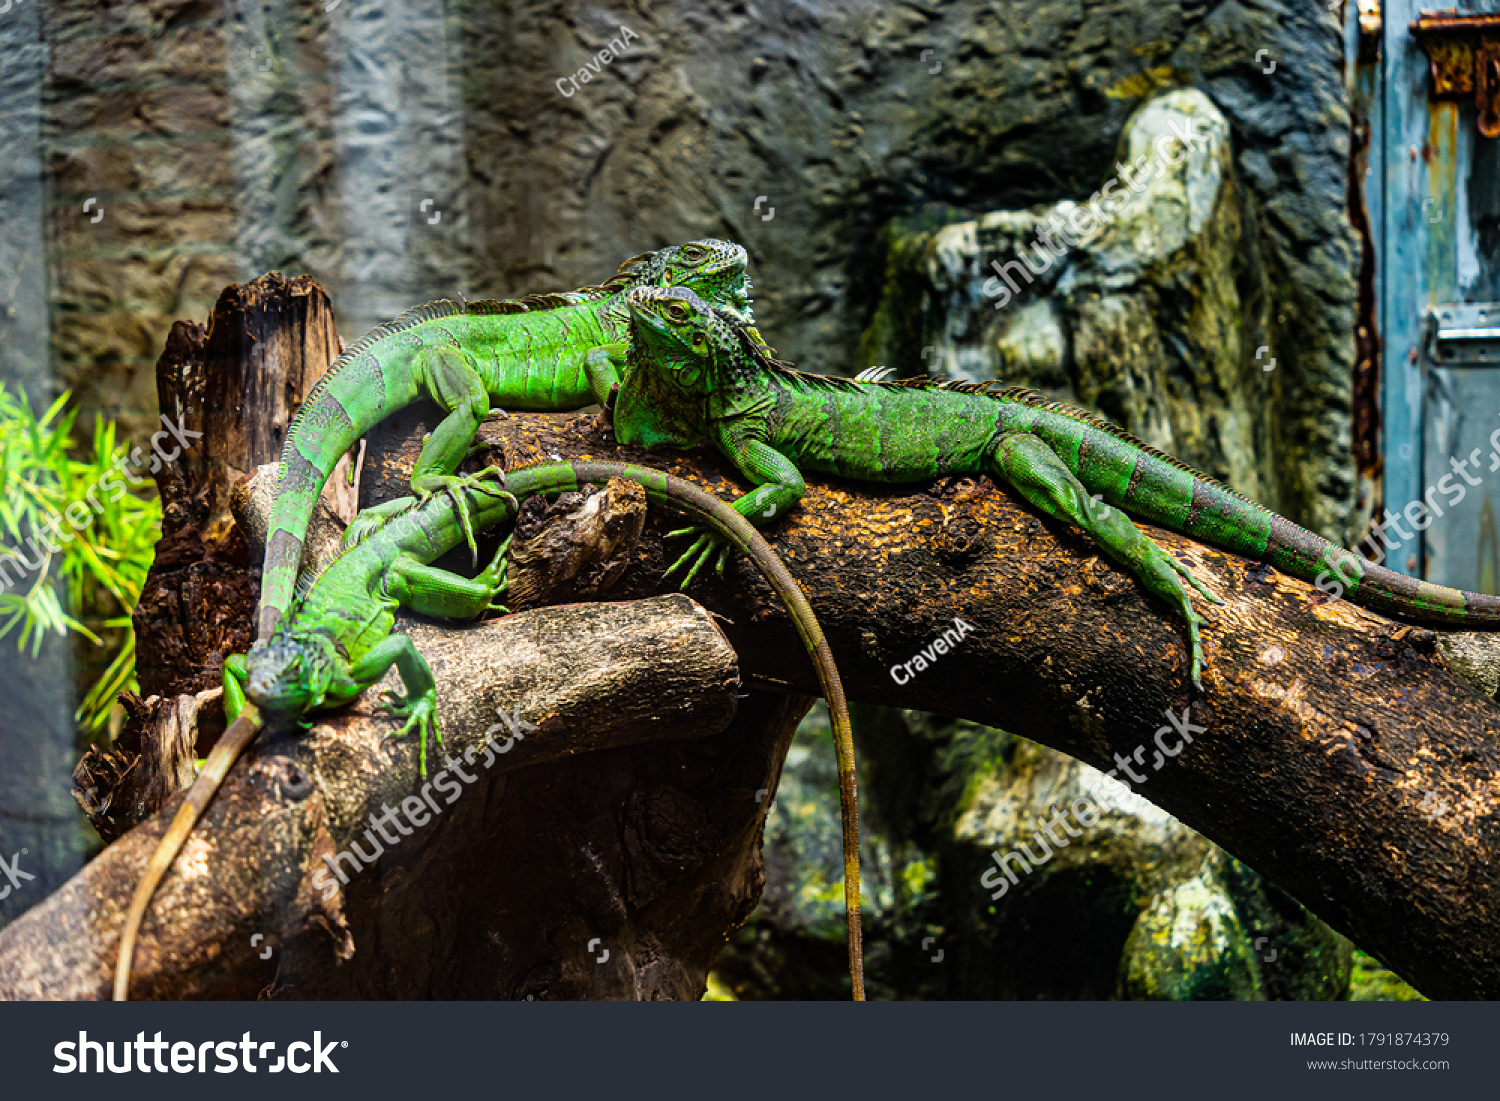 Green iguana. Iguana - also known as Common iguana or American iguana. Lizard families, look toward a bright eyes looking in the same direction as we find something new life. Location in Saigon Zoo. #1791874379